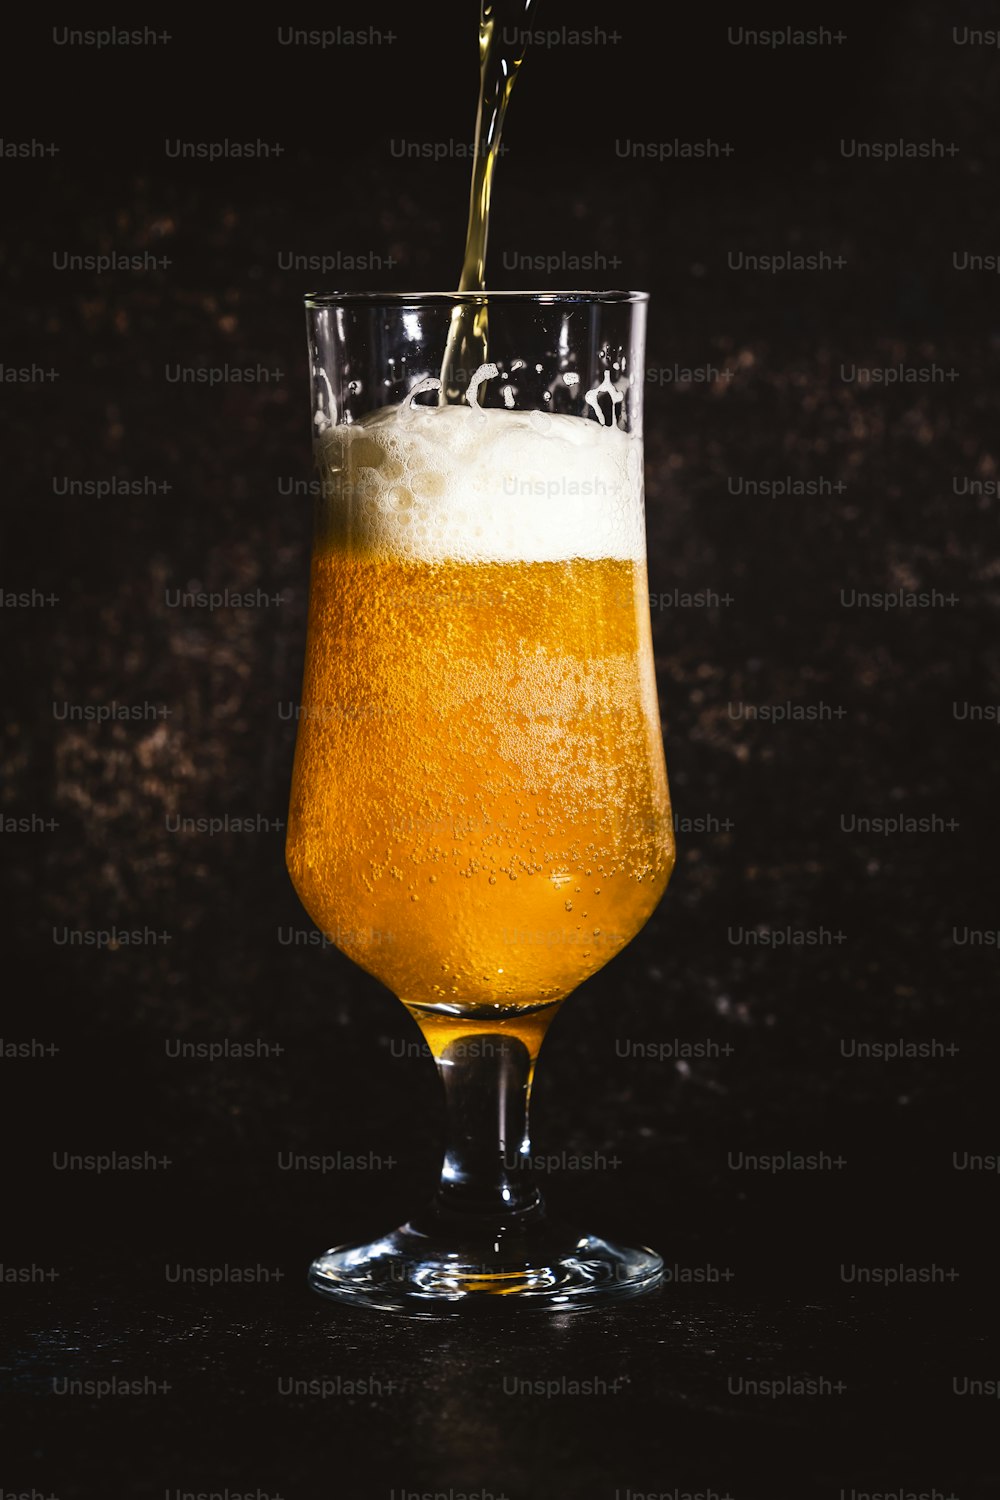 a glass of beer being poured into it